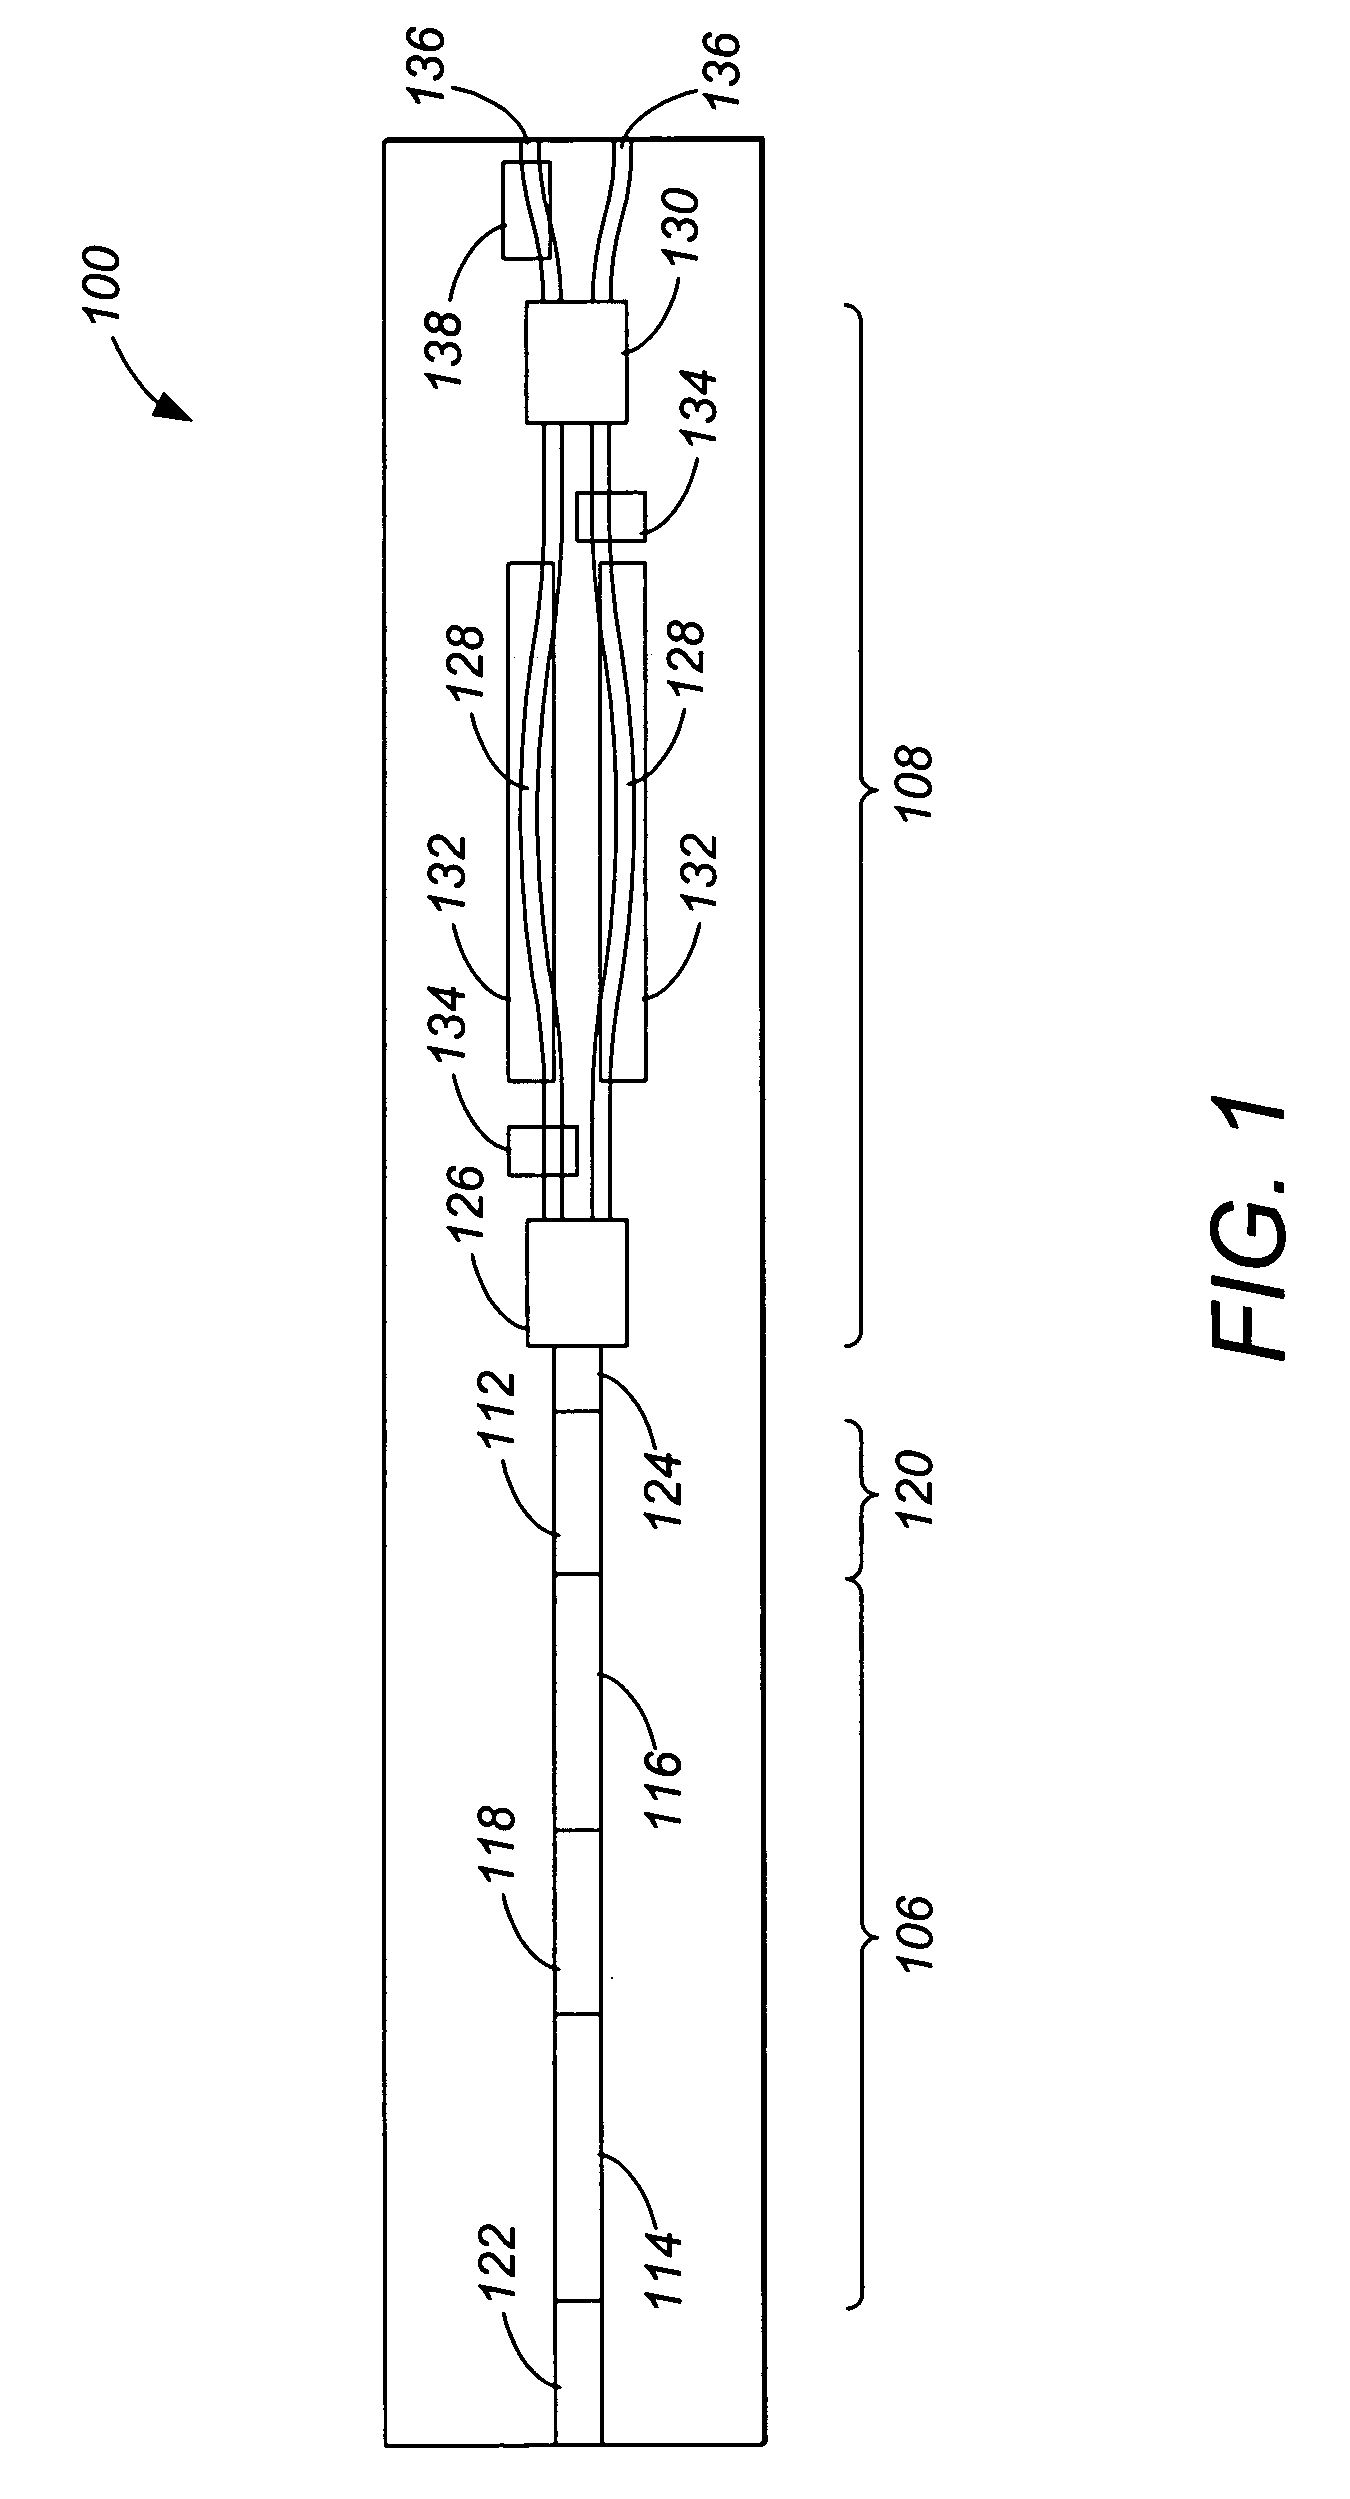 Tunable laser source with monolithically integrated interferometric optical modulator